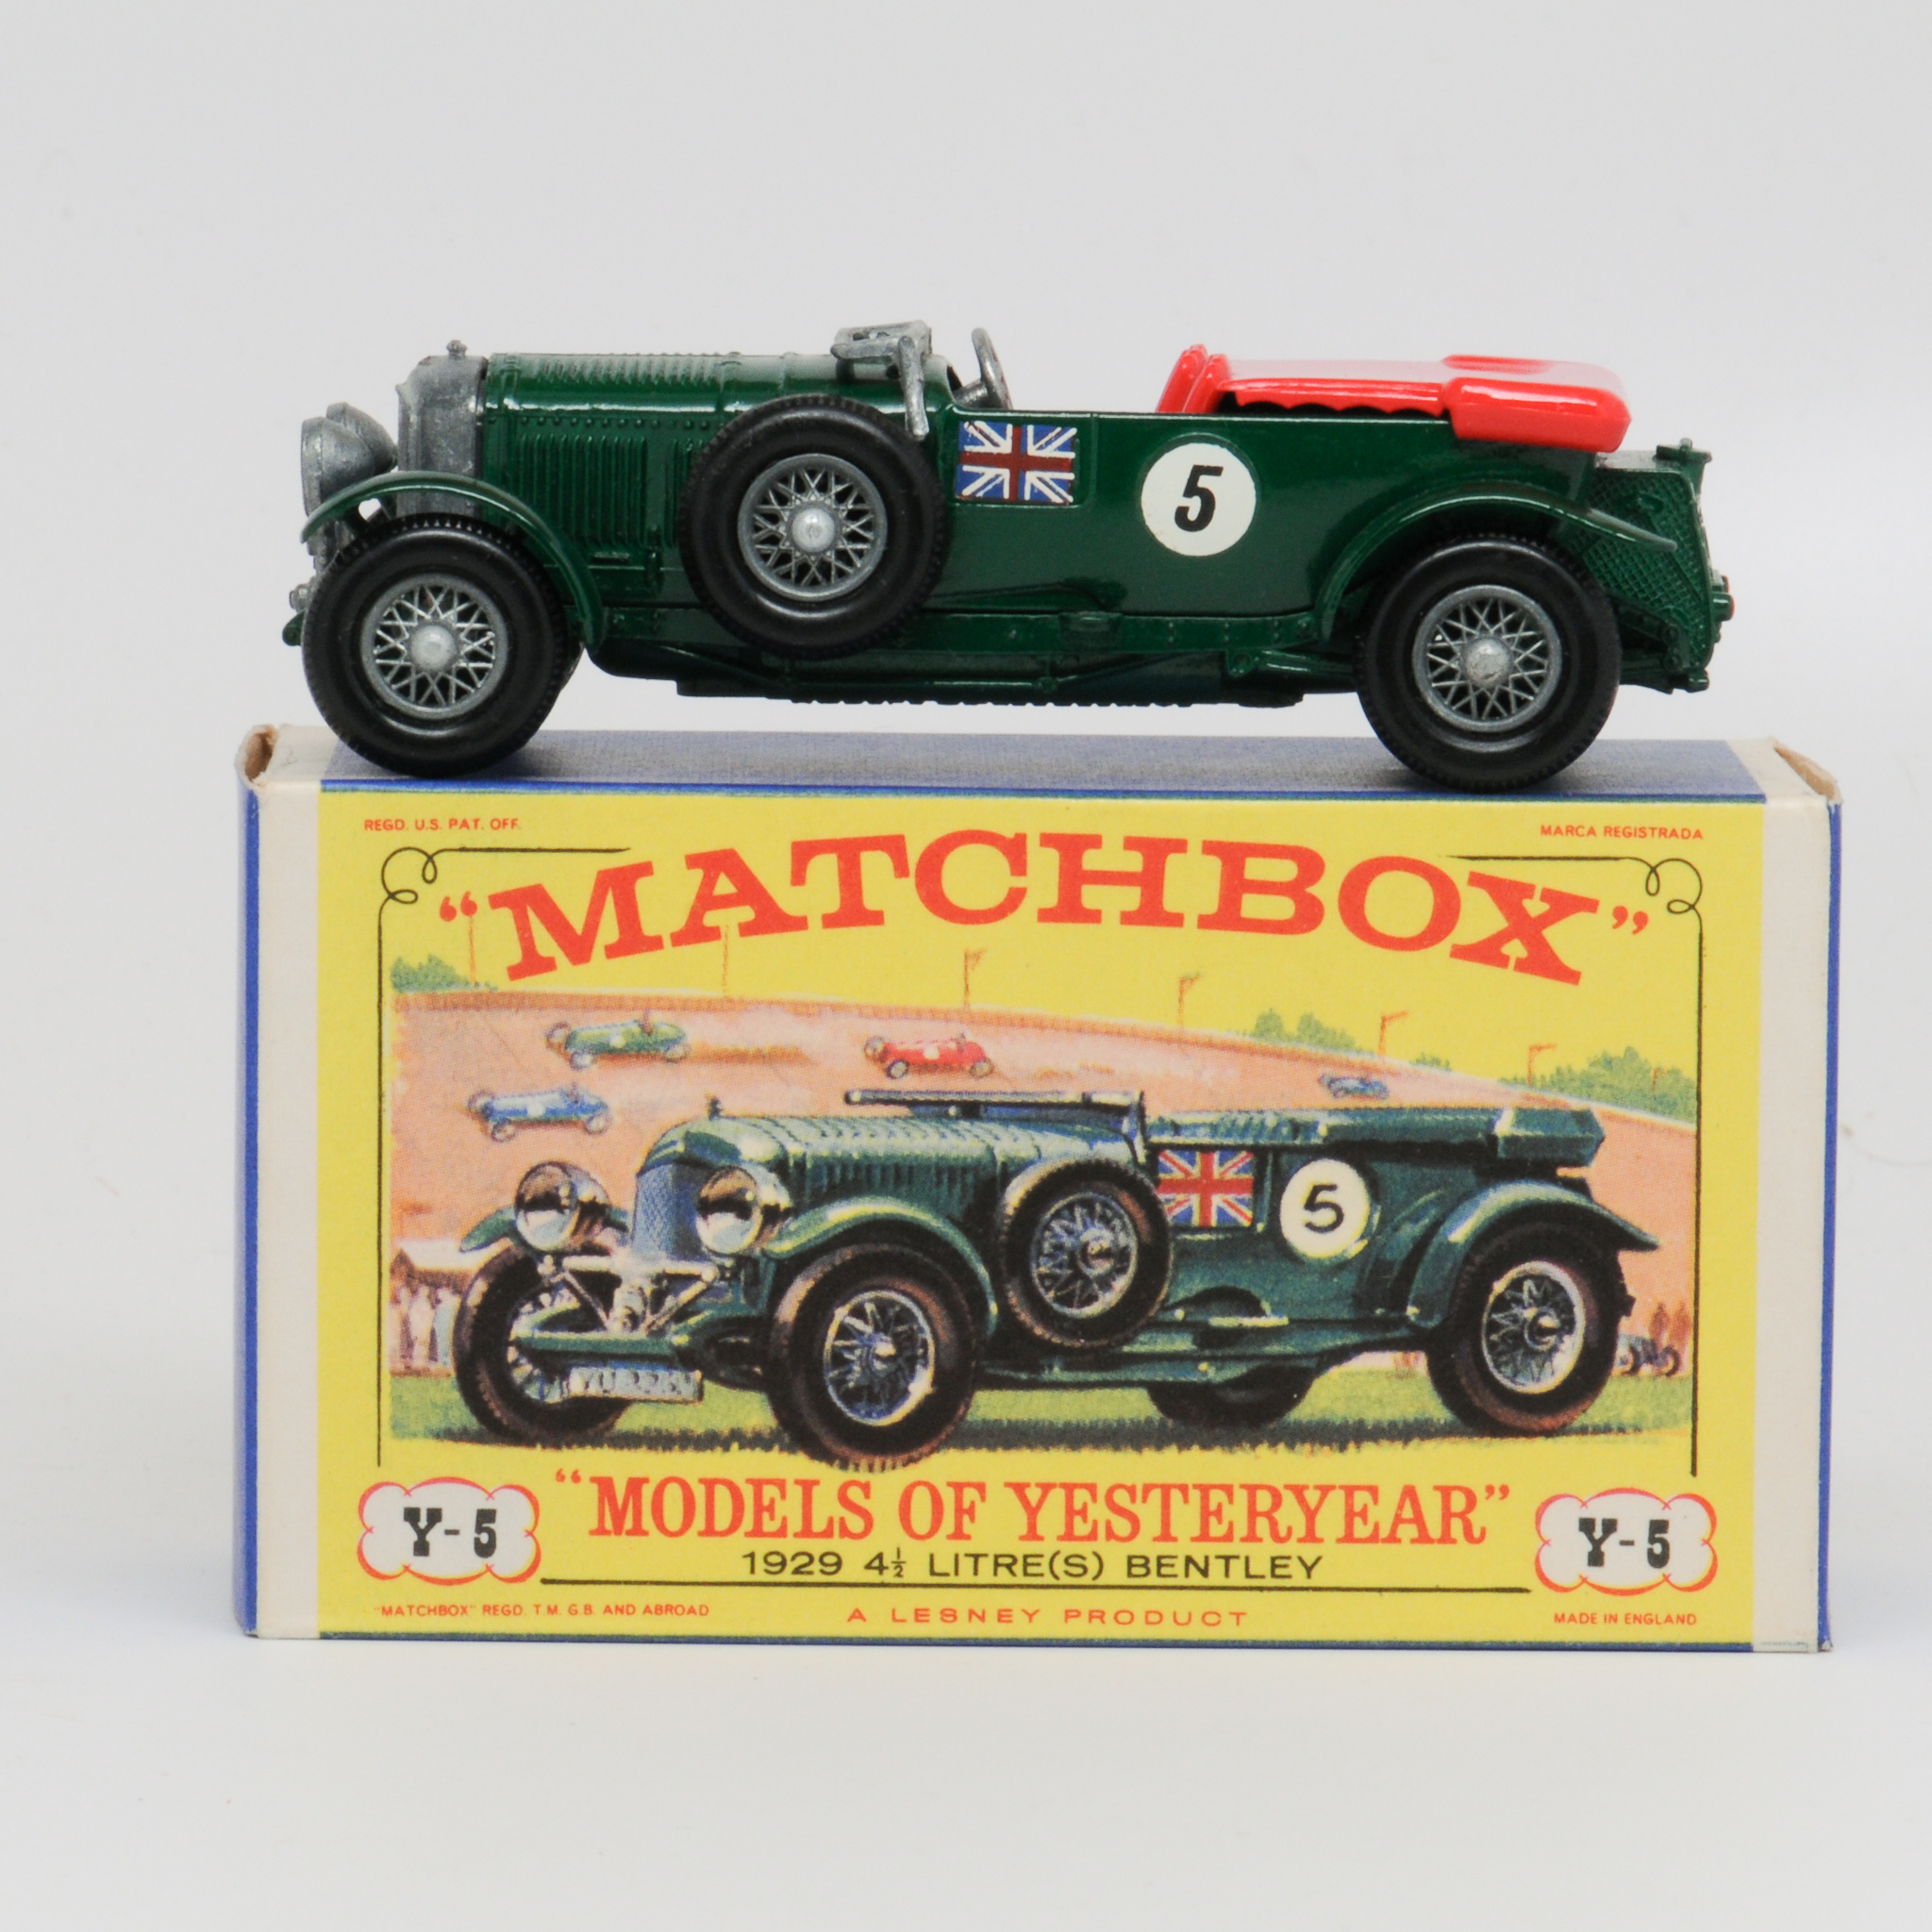 Matchbox+Yesteryear++Y5-2+4+1%2F2+litre%28S%29+Bentley+rarer+version+MIB picture 1